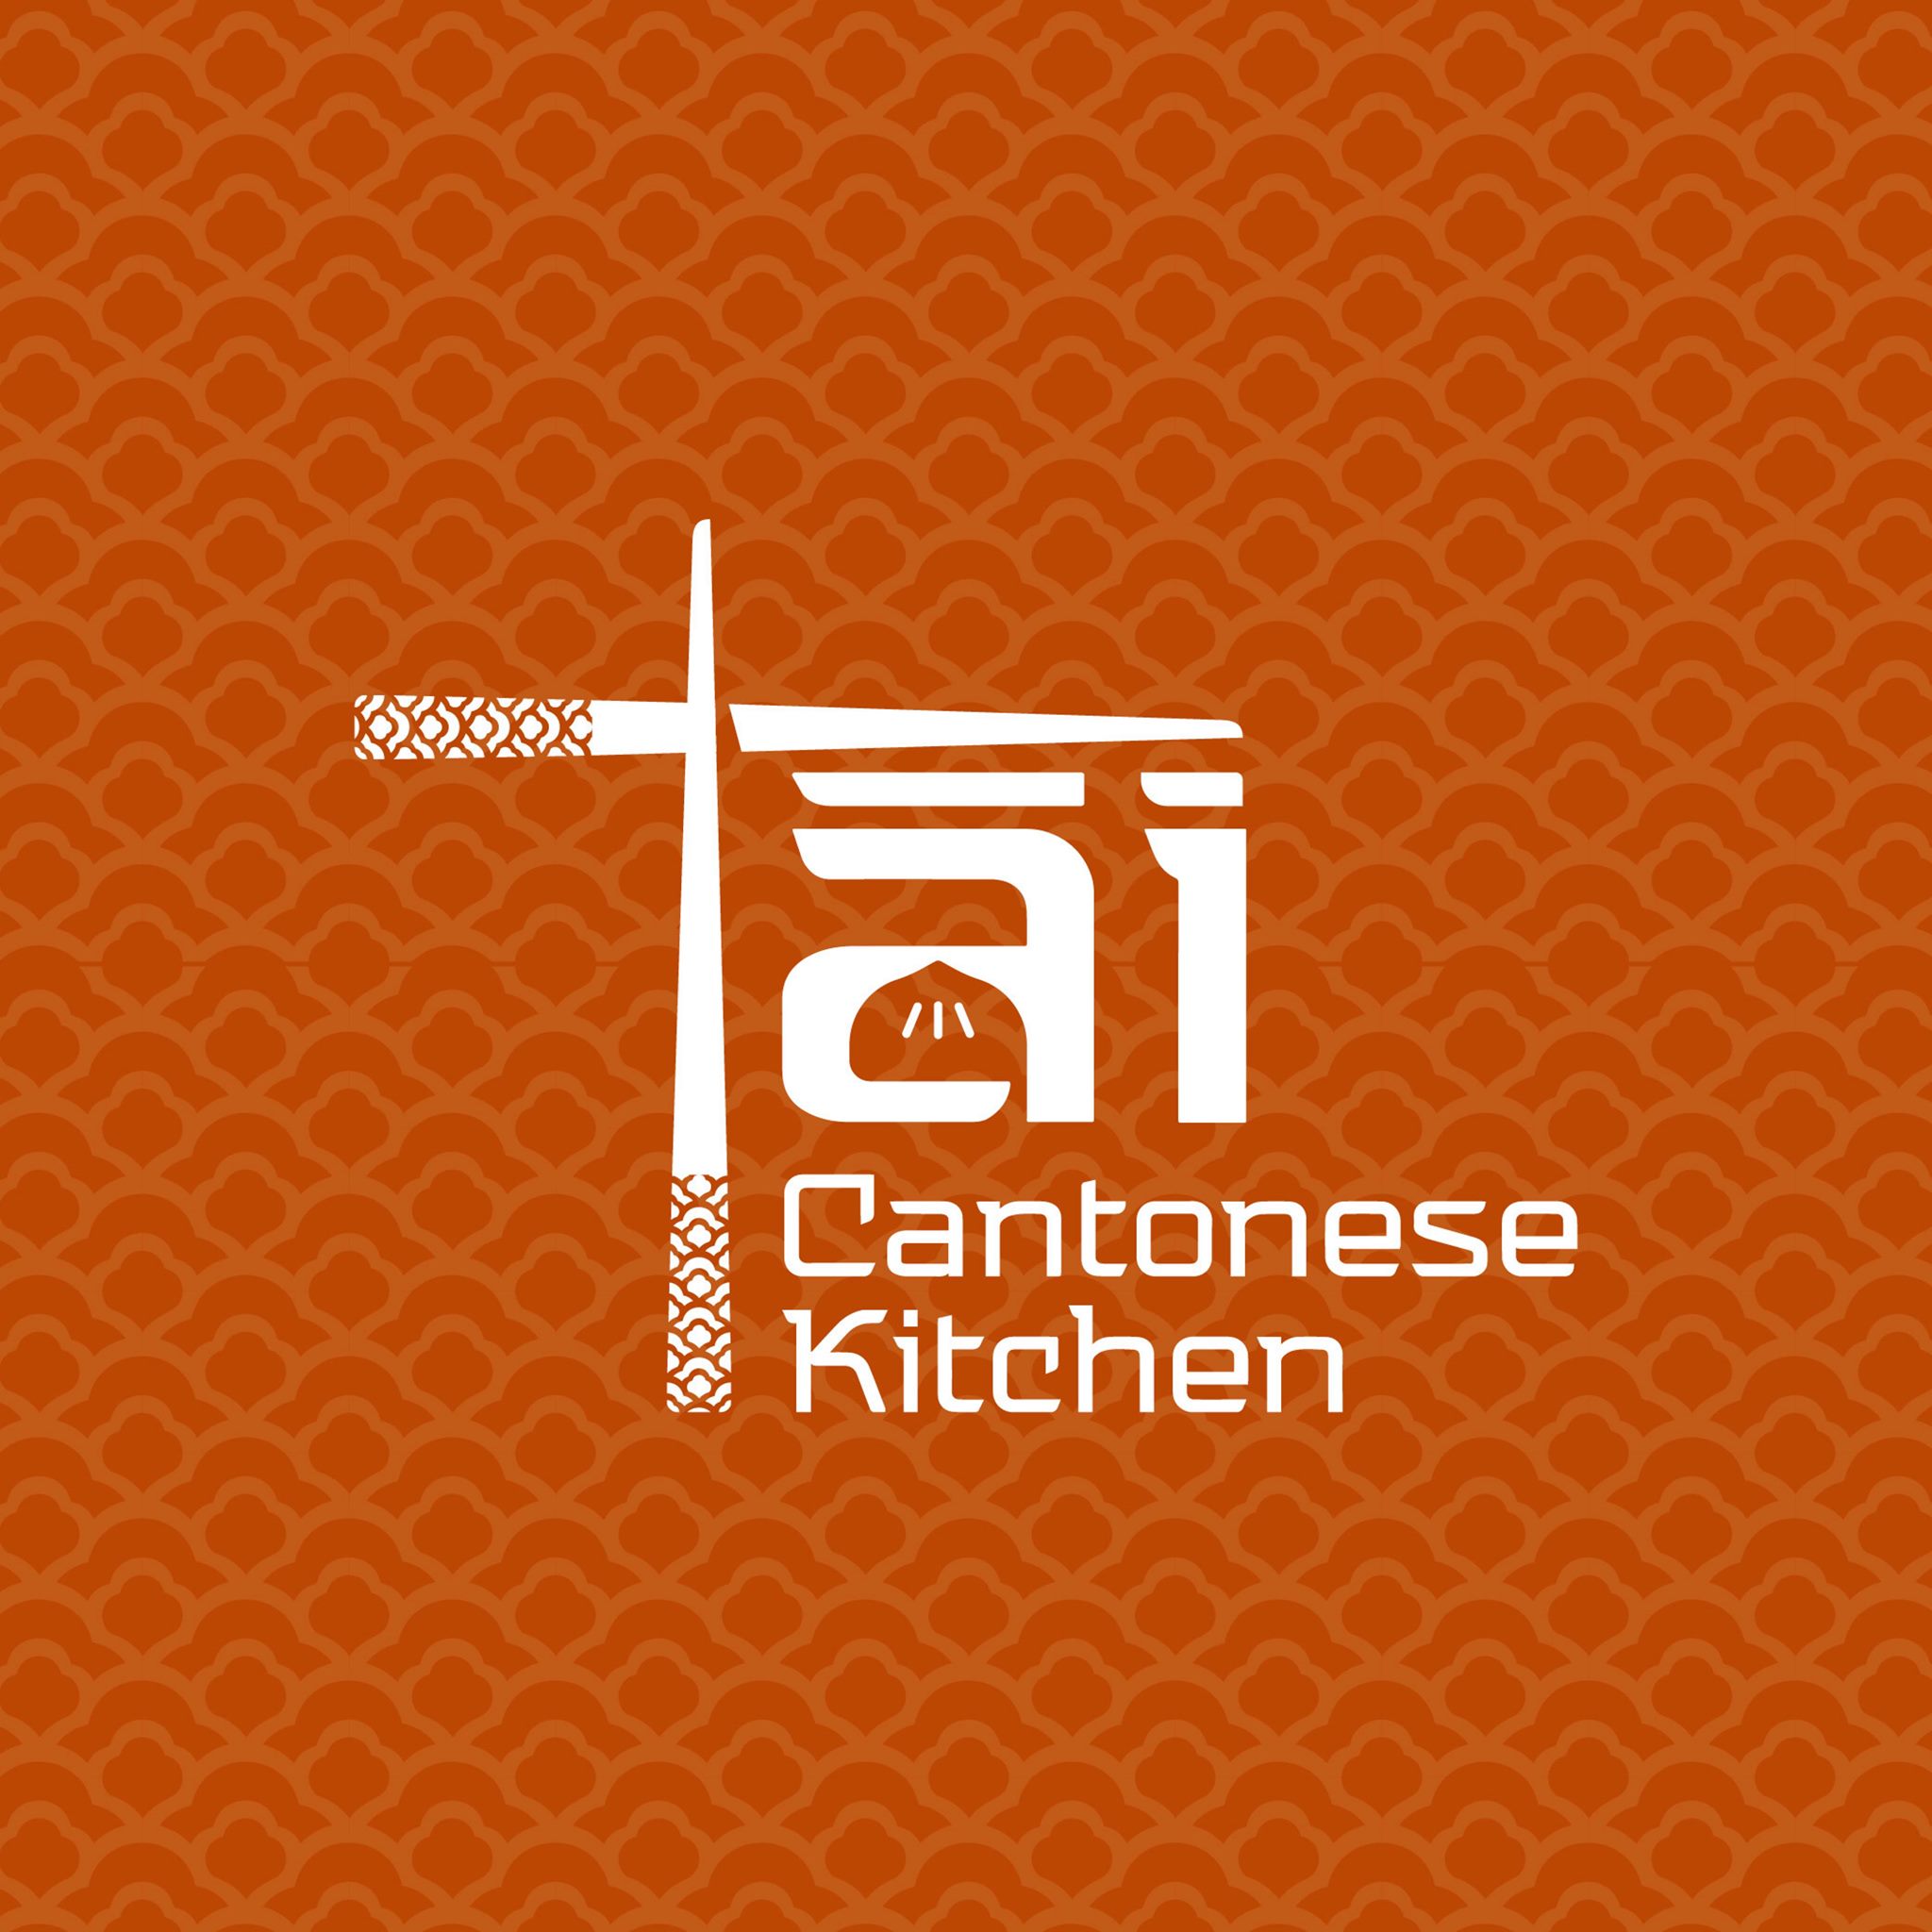 Tài Cantonese Kitchen. Clients of Concept Tử Tế, the top Vietnamese Branding Agency